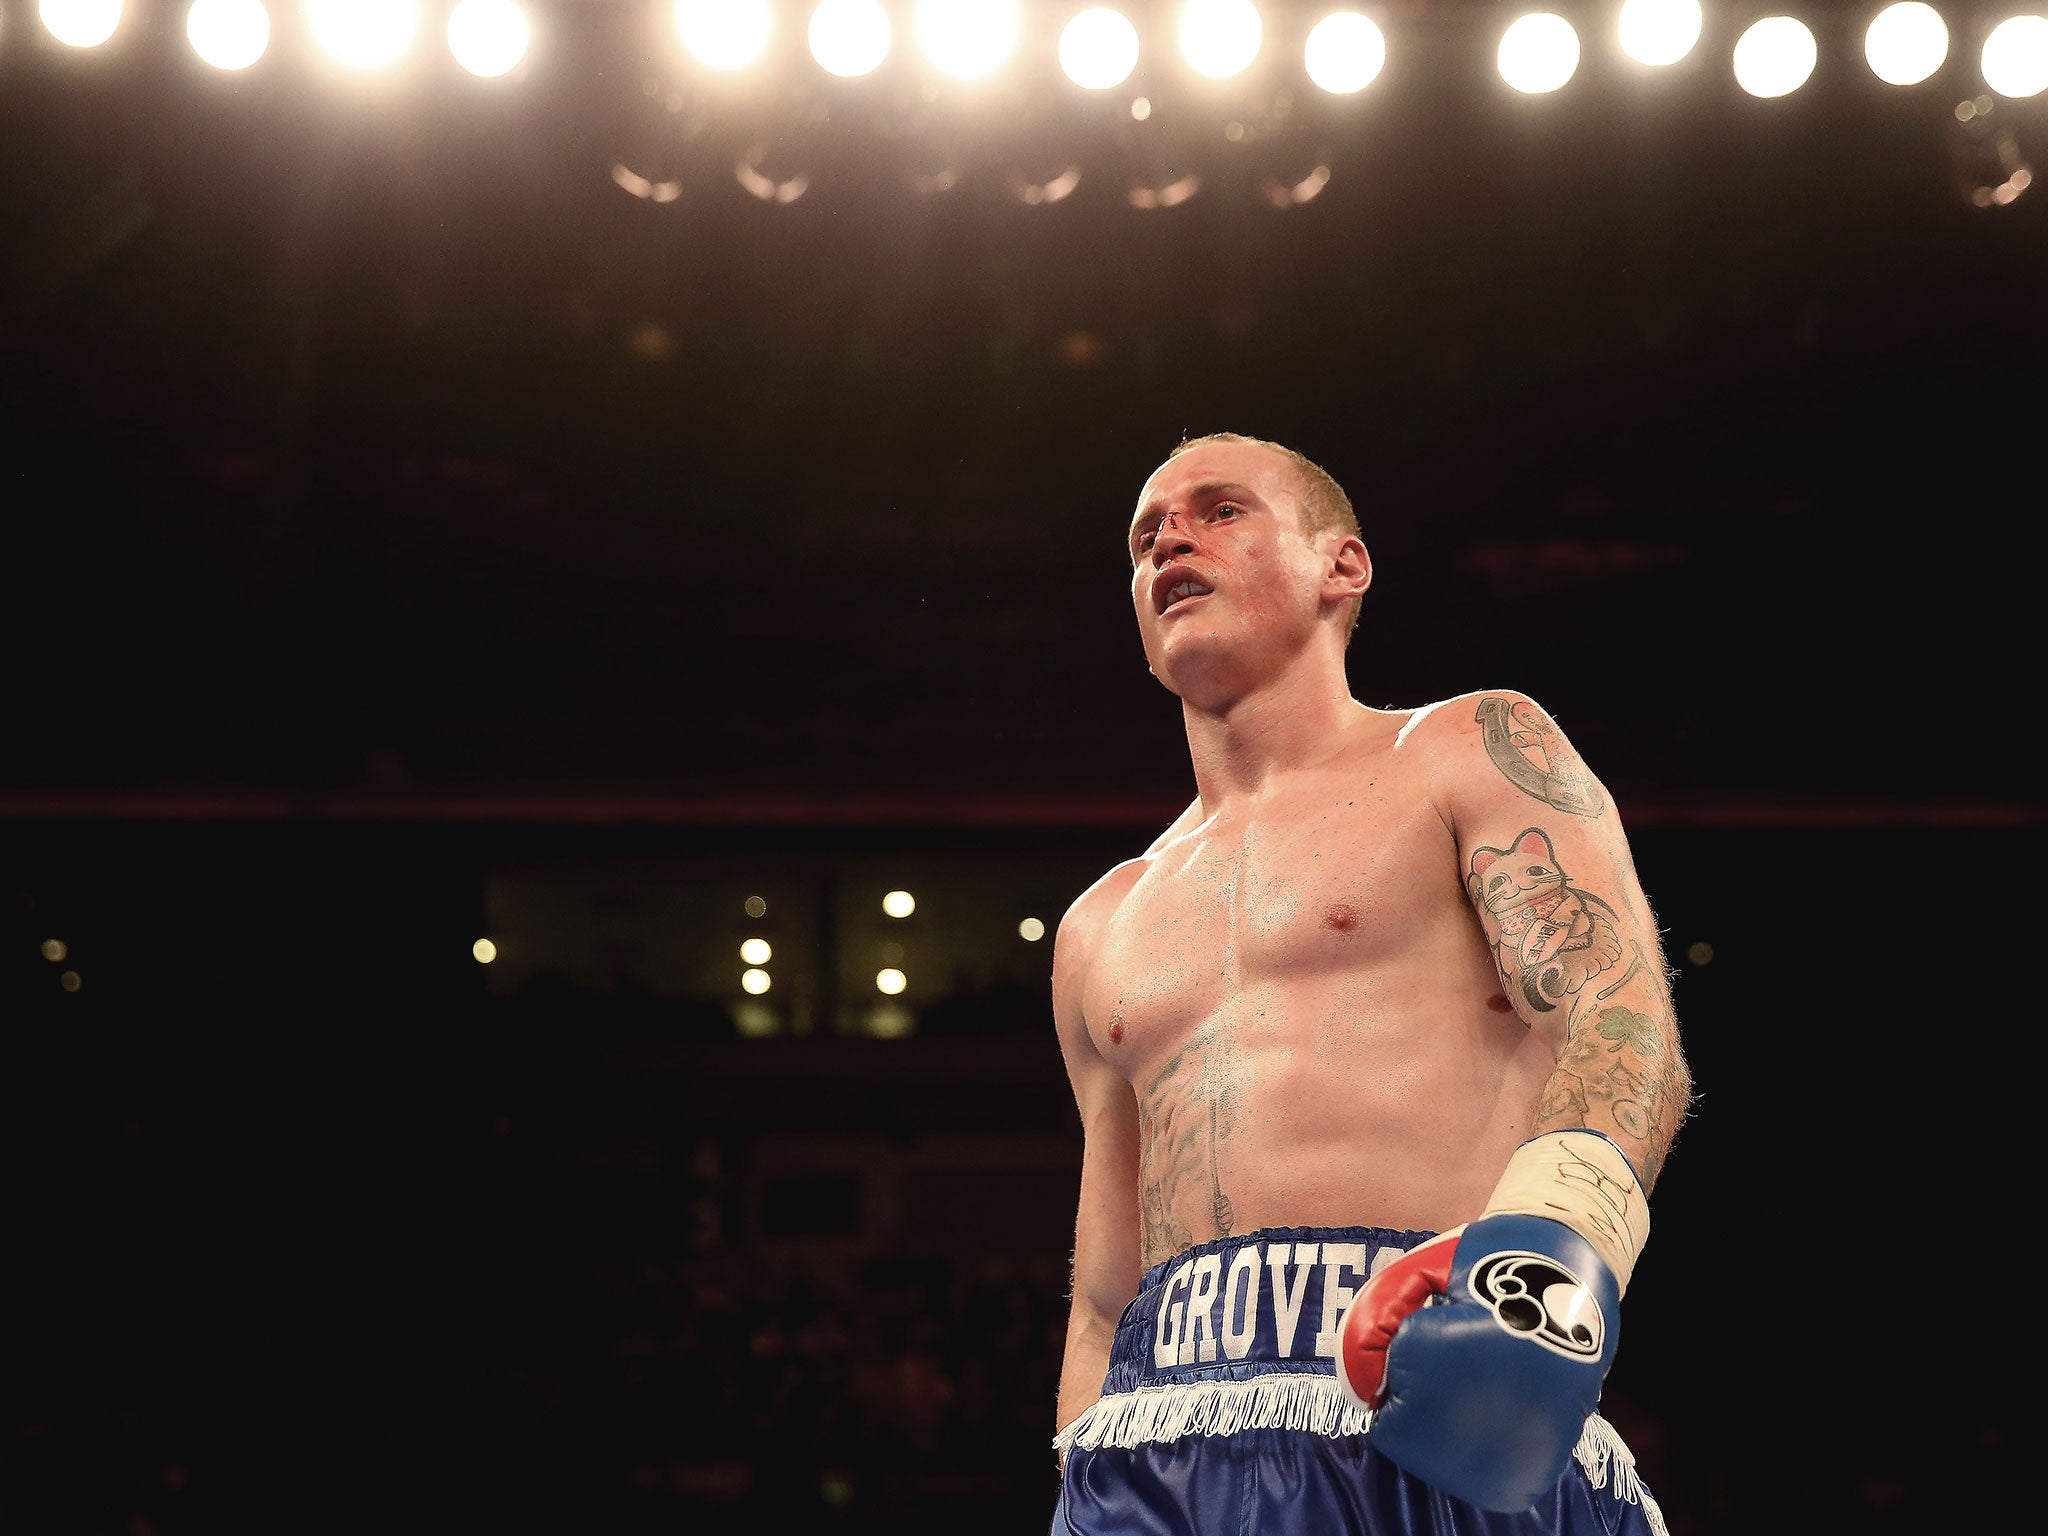 Groves dismissed the idea that Fury's gloves played any role in his victory against Wilder (Getty)